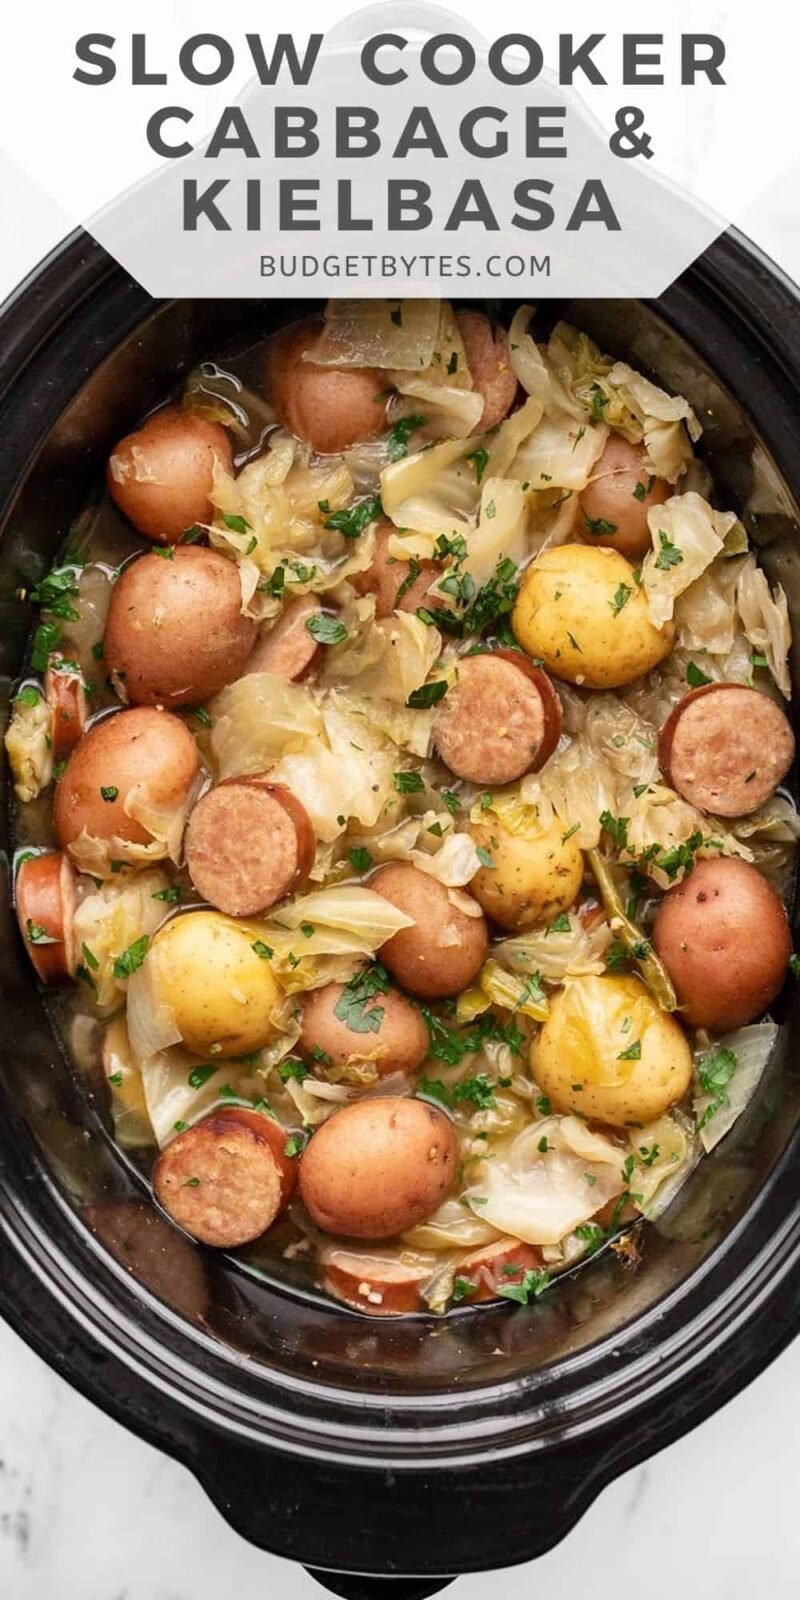 Overhead view of cabbage and sausage in the slow cooker, title text at the top